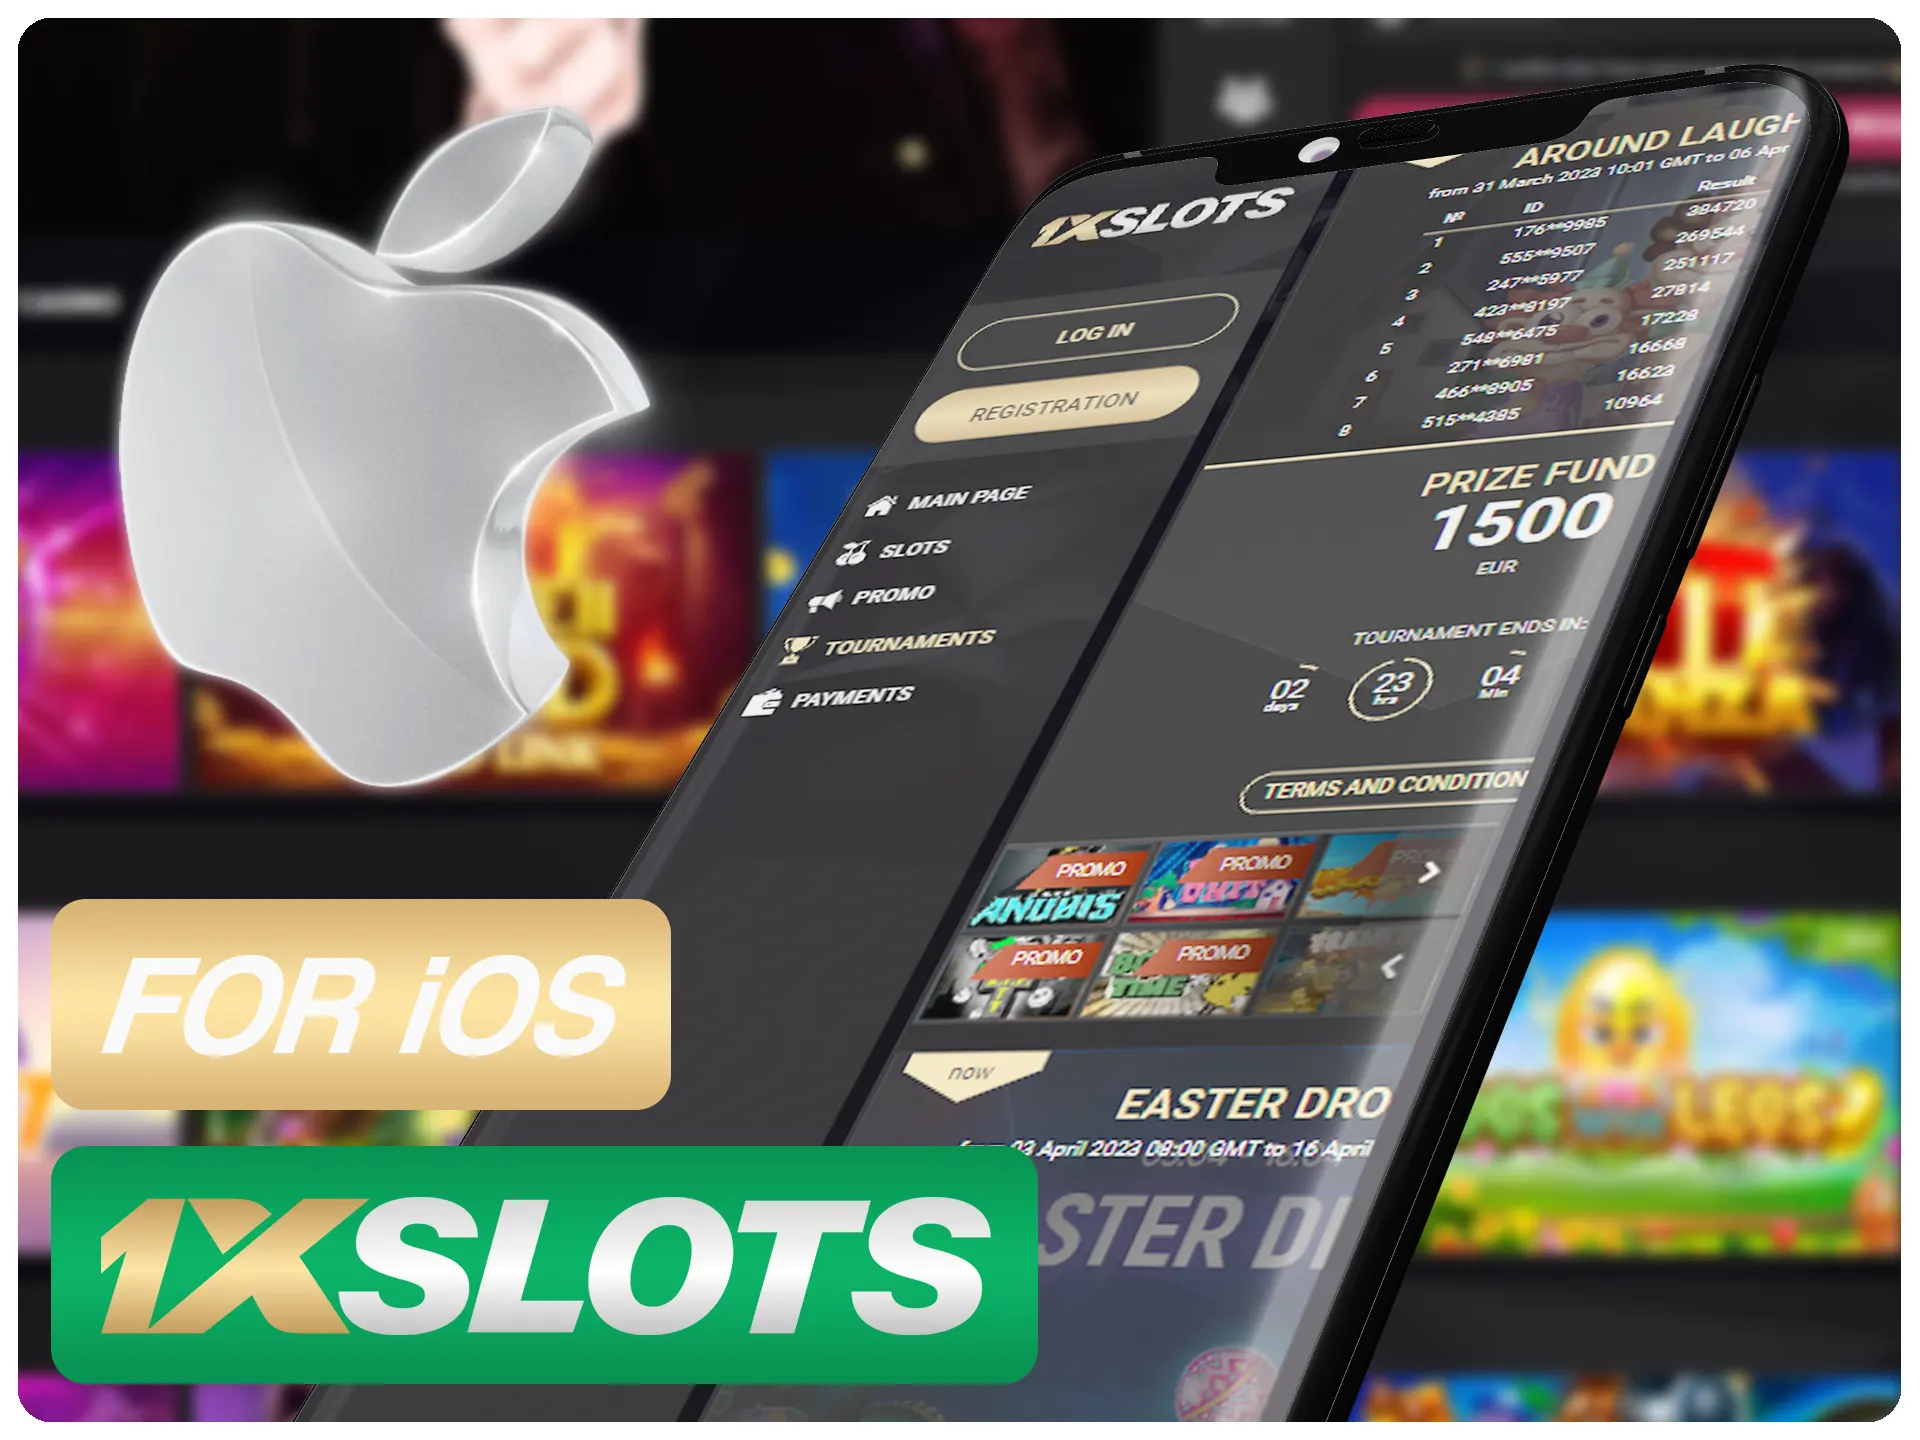 Install 1xSlots app on any of your iOS devices.